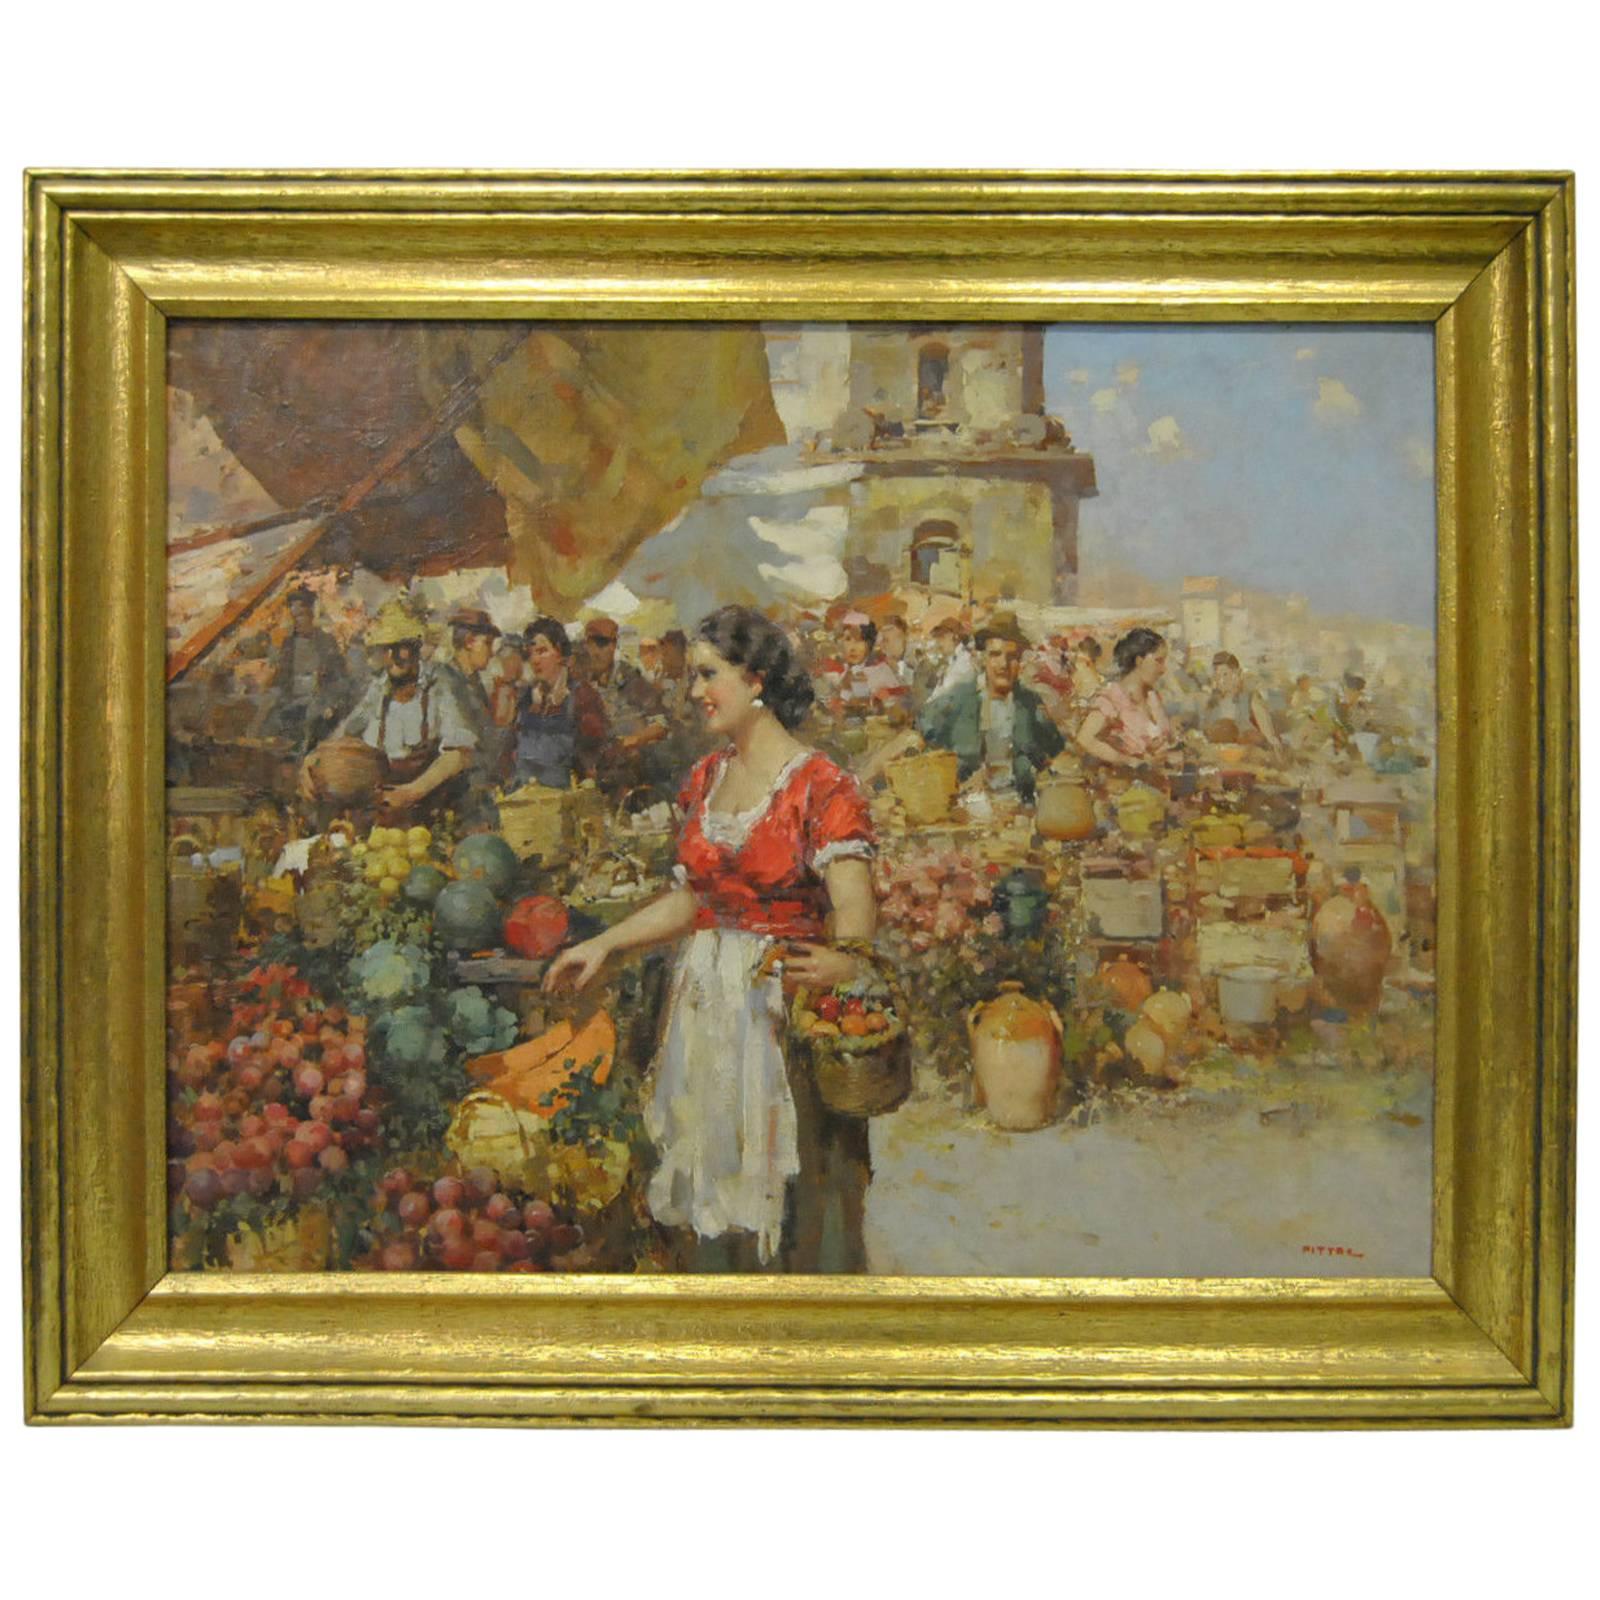 Impressionist Oil on Canvas by Italian Artist Giuseppe Pitto of Lady in Market